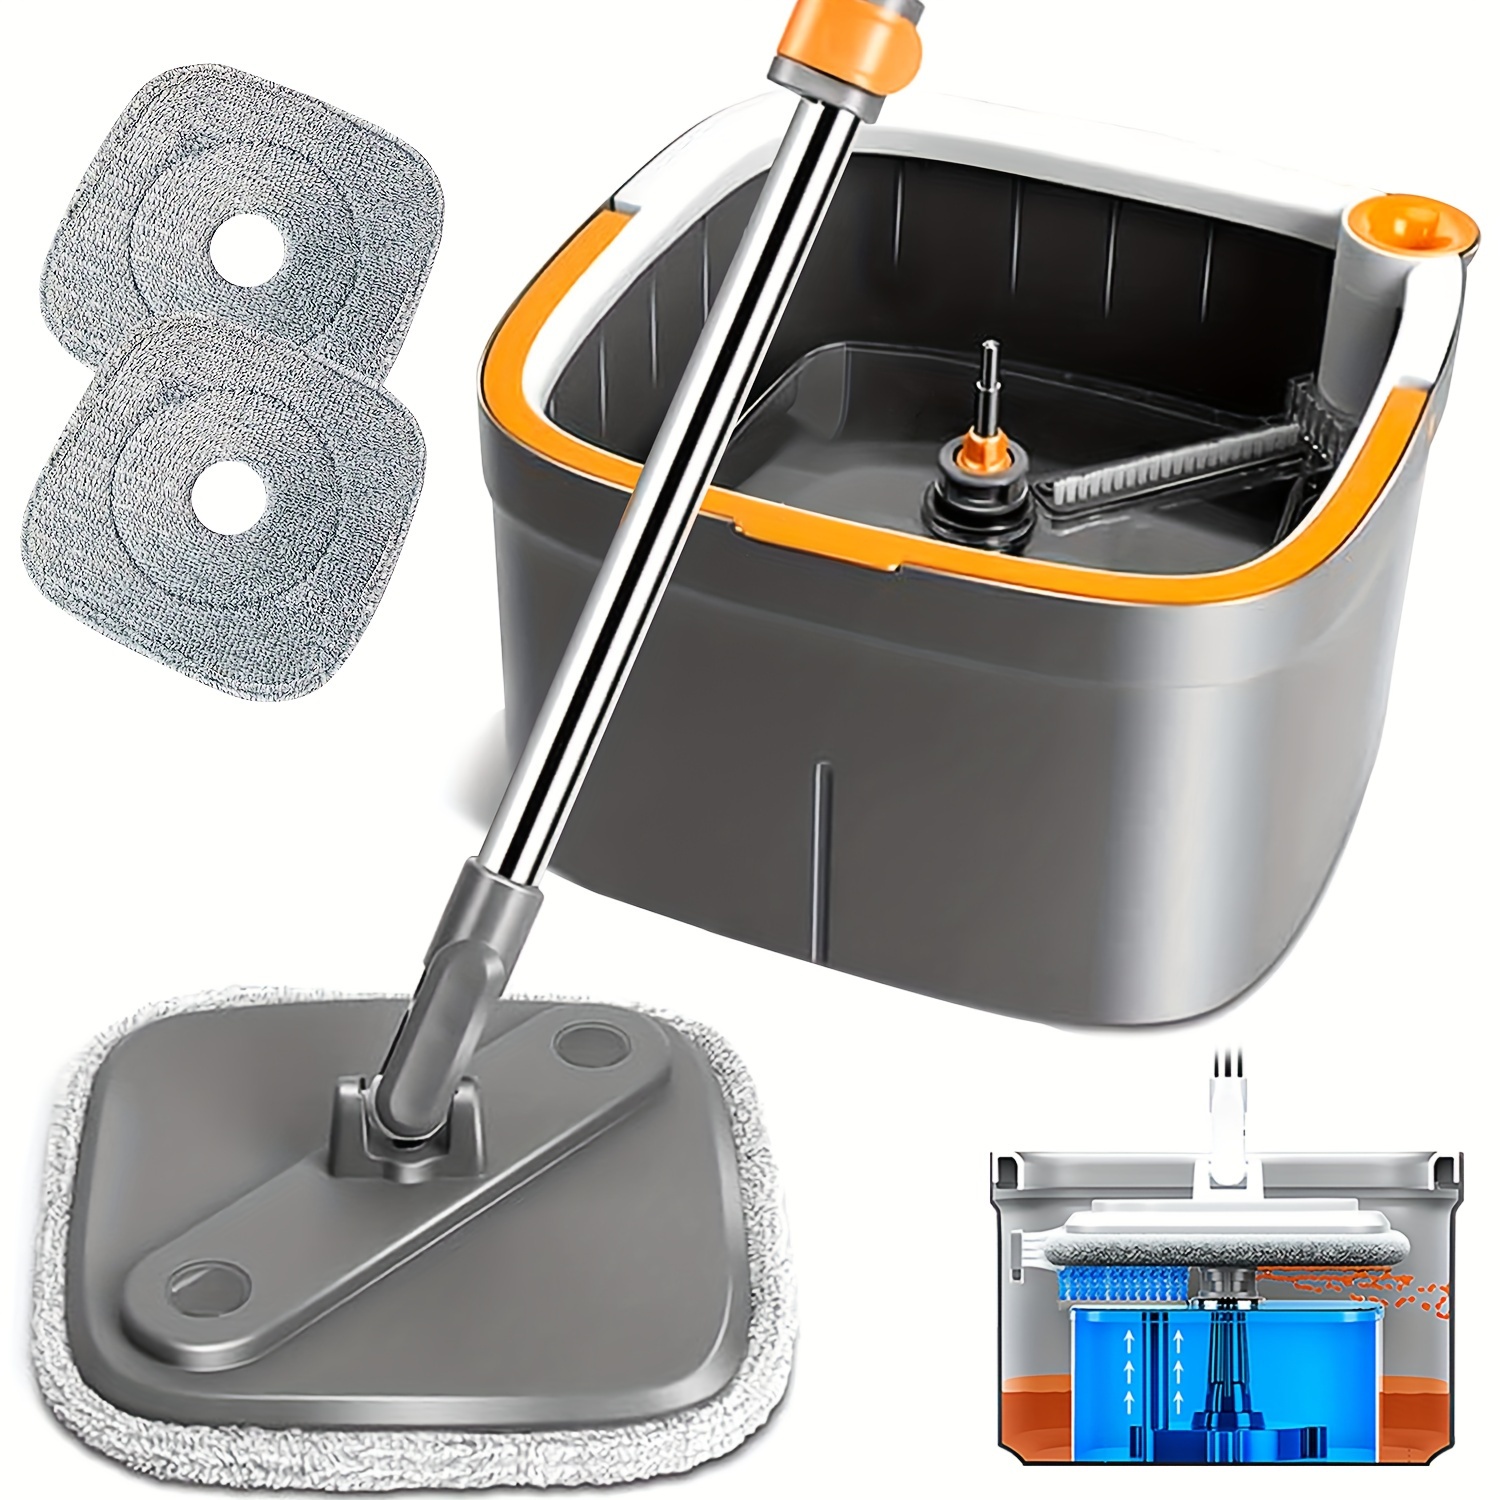 

Spin Mop And Bucket, Mop And Bucket With Wringer Set For Home Cleaning Mops With Separate Dirty And Clean Water Wet And Dry Mop For Floors (square Spin Mop, 2 Washable Microfiber Mop Pads)